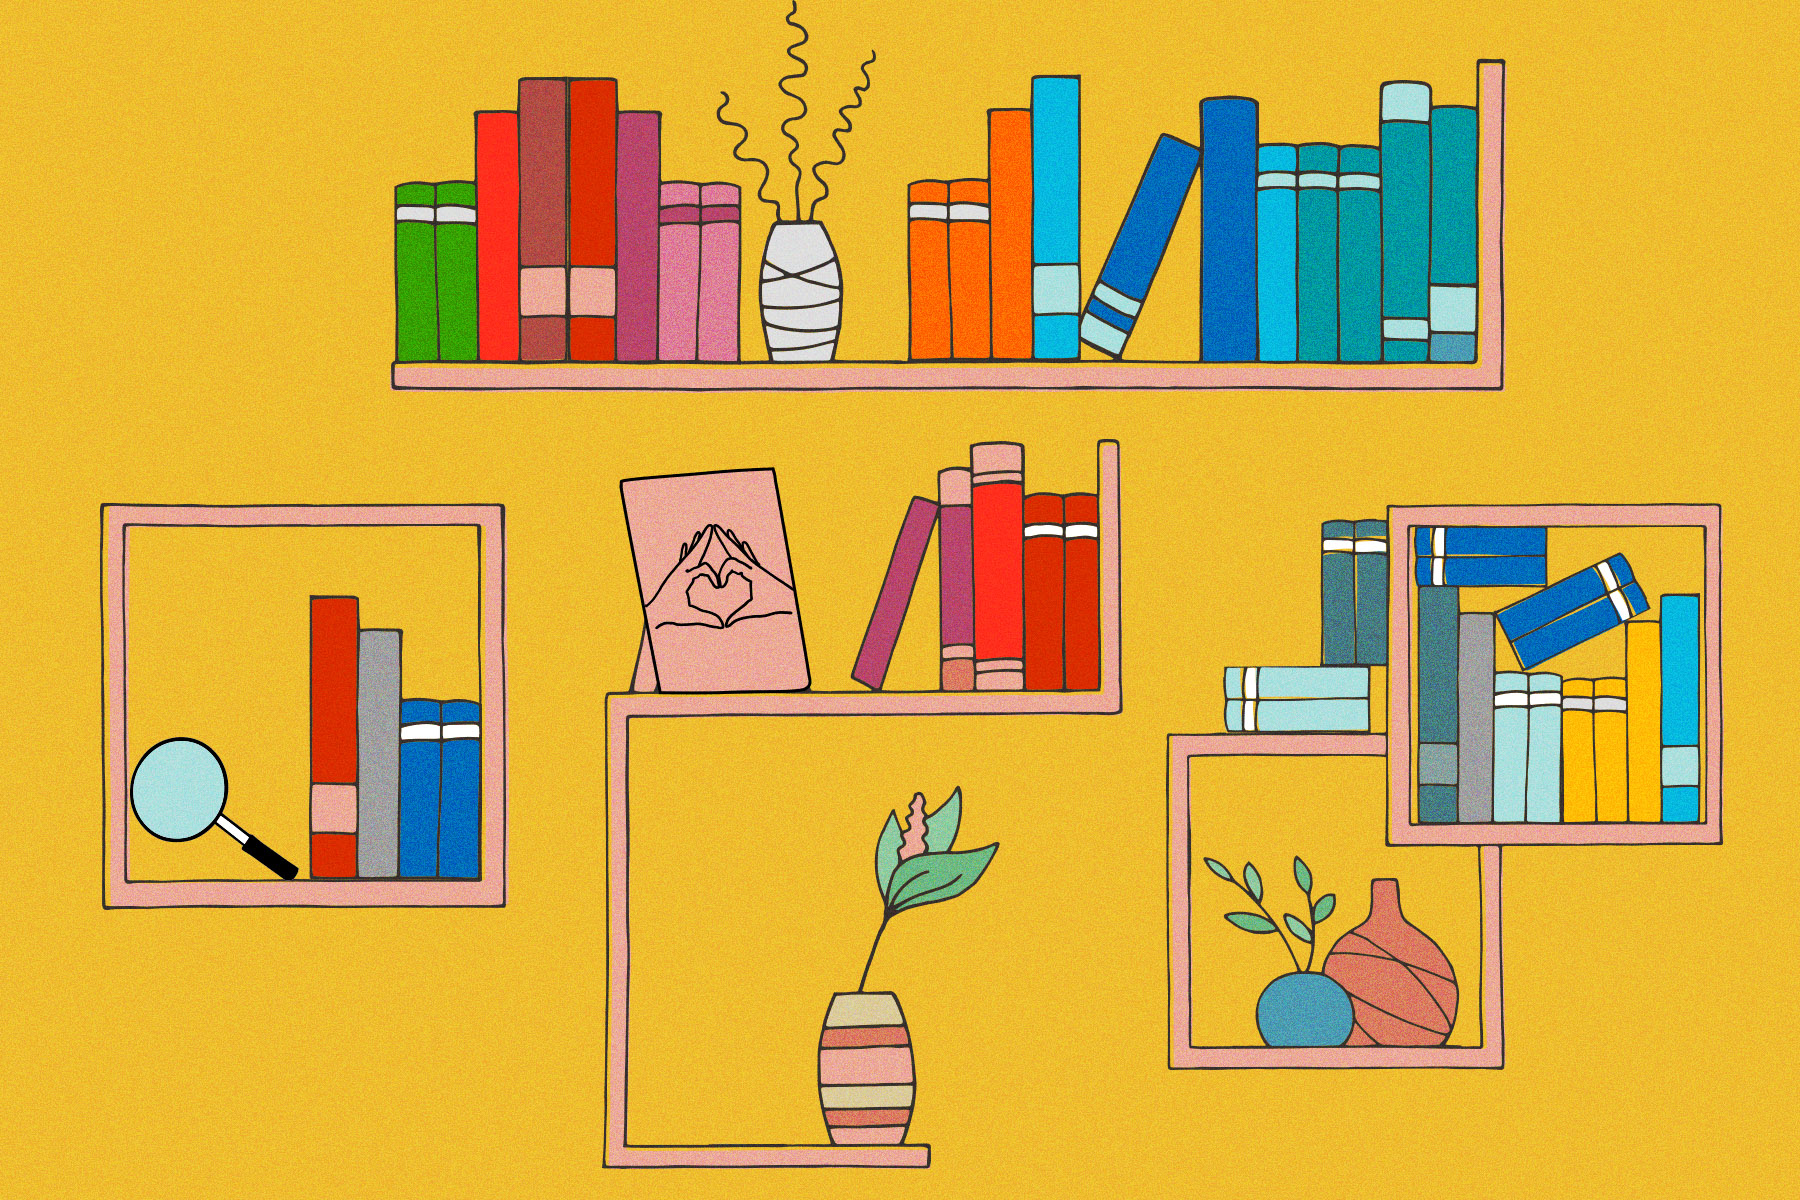 An illustration of bookshelves against a yellow background